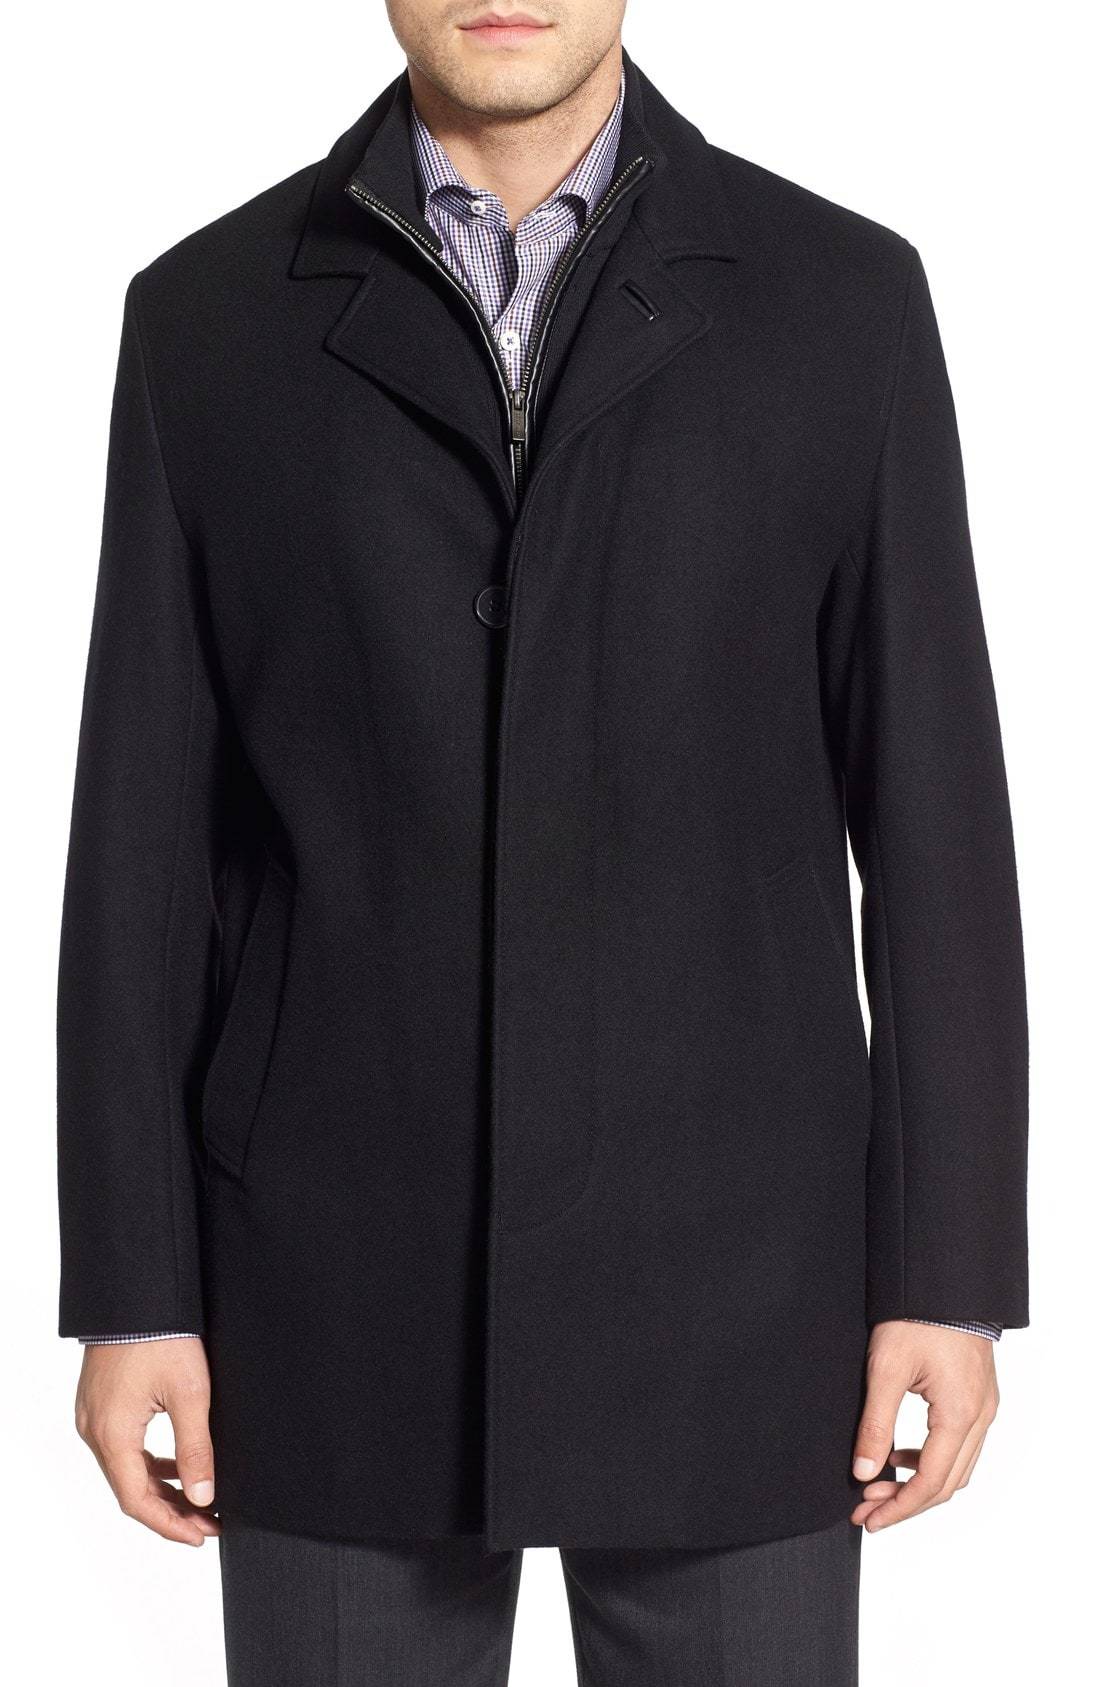 Cole Haan Wool Blend Topcoat With Inset Knit Bib, $219 | Nordstrom ...